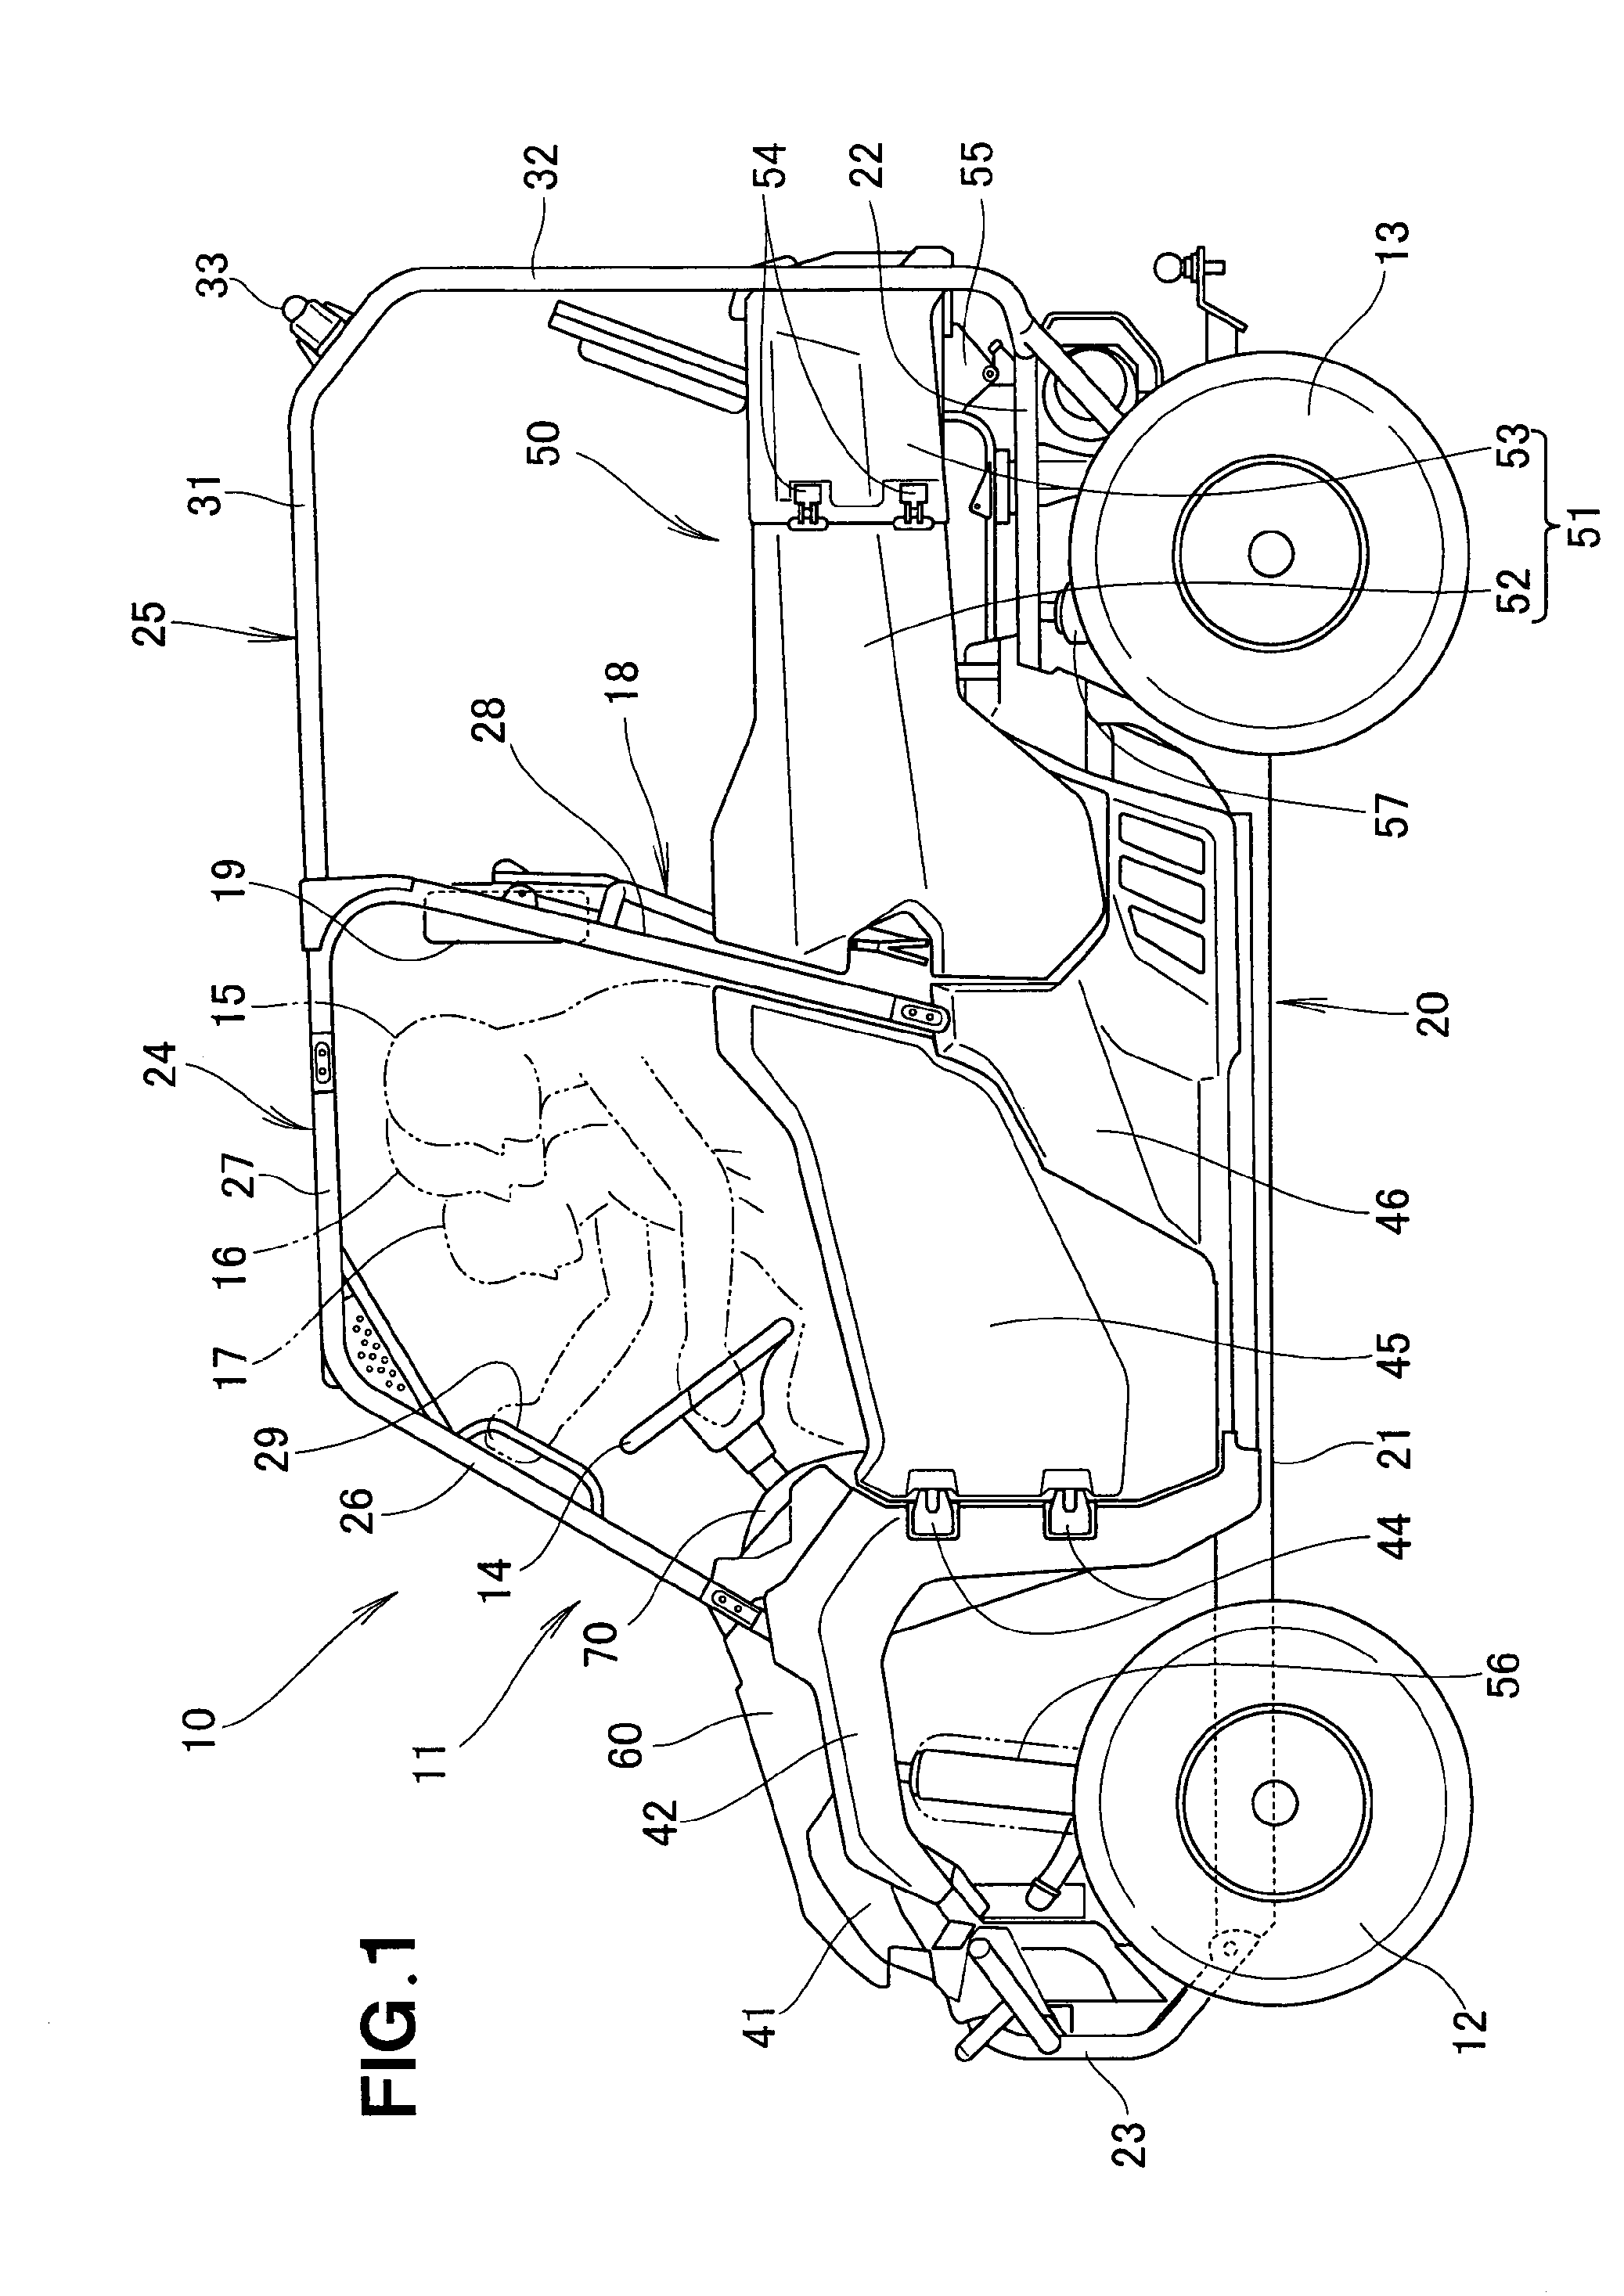 Hood structure for uneven terrain traveling vehicle